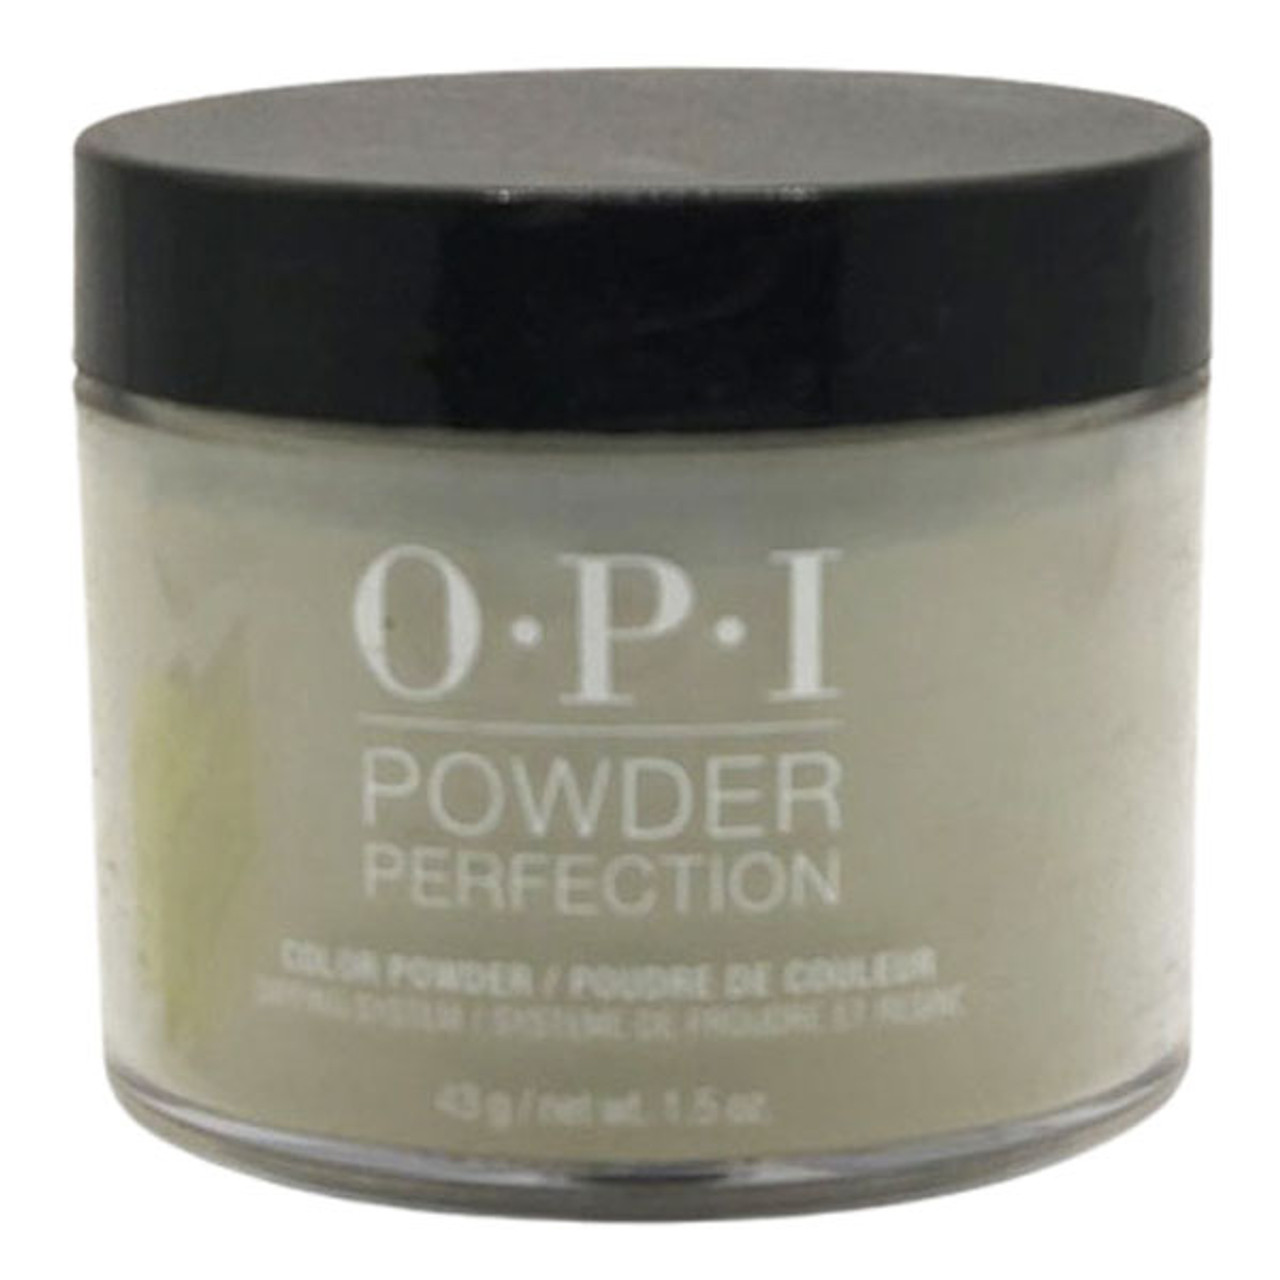 OPI Dipping Powder Perfection This Isn't Greenland - 1.5 oz / 43 G